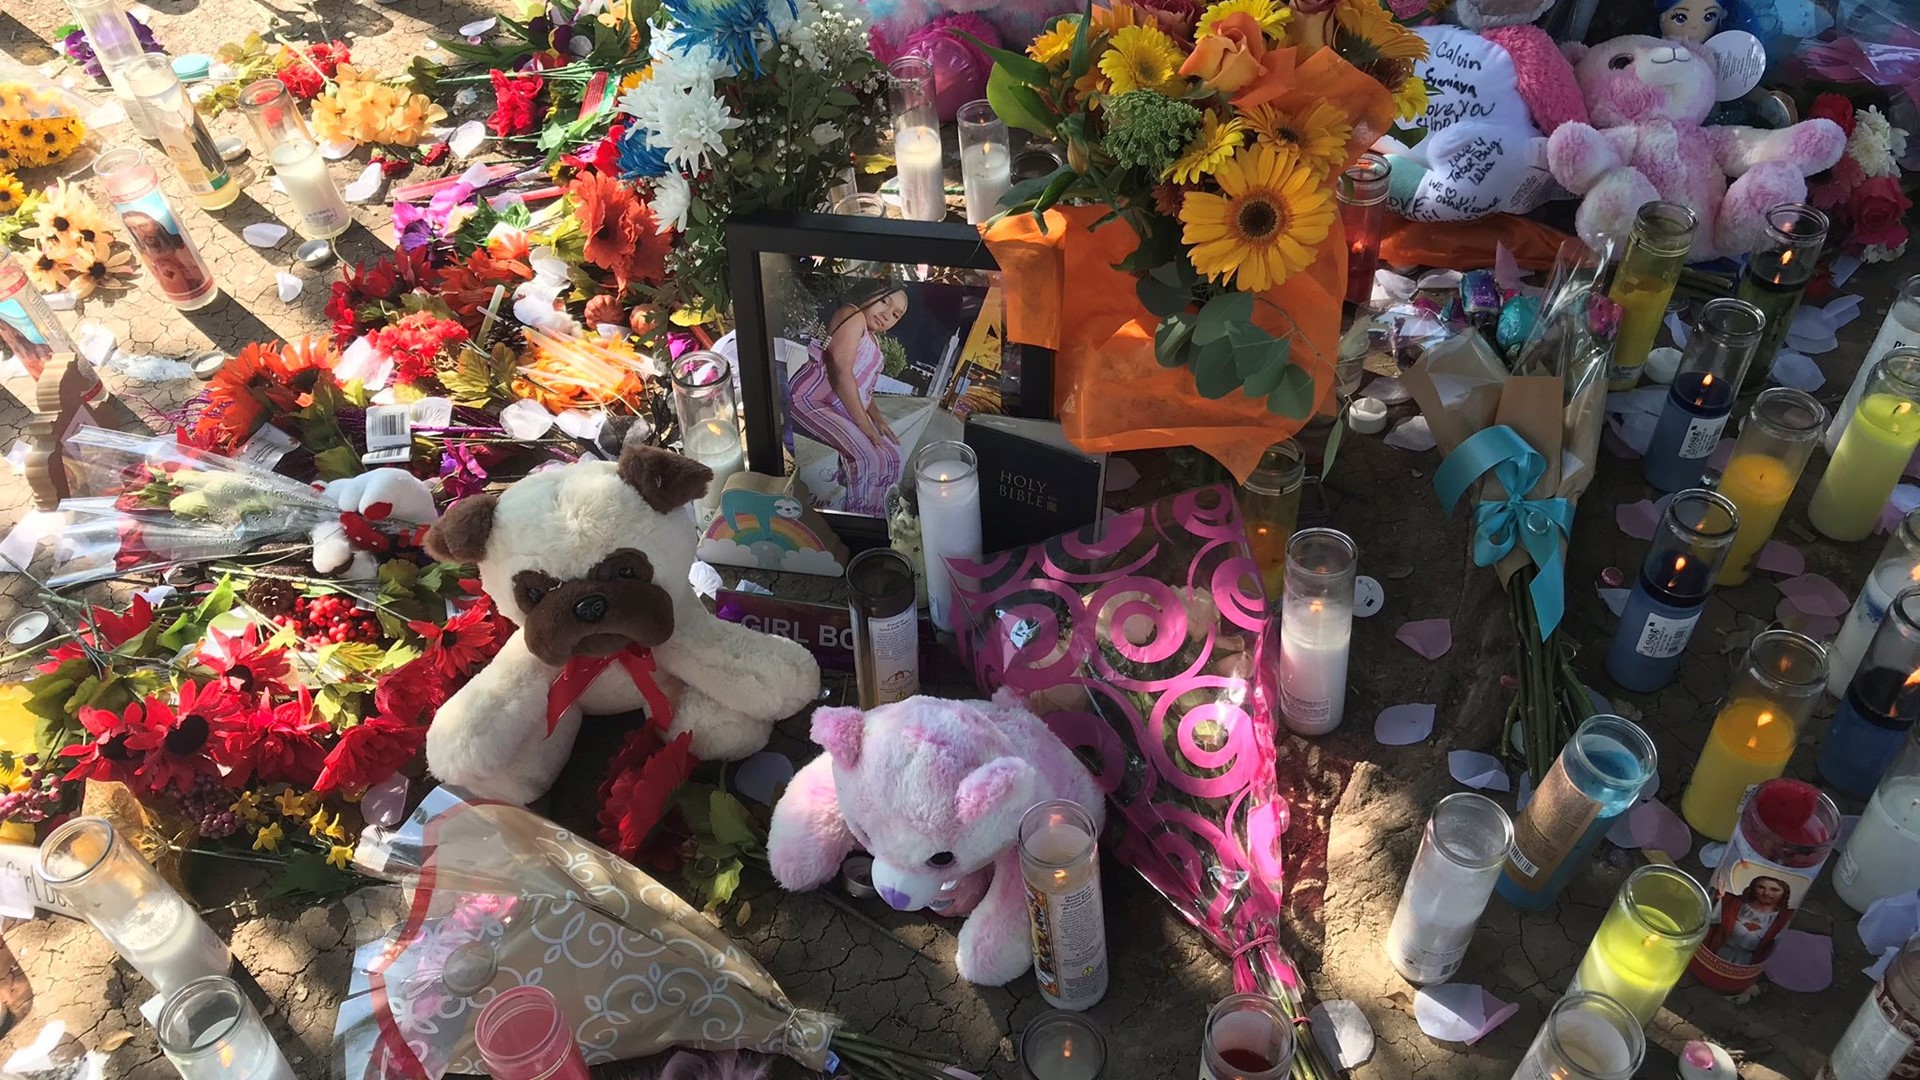 72 people have been killed in the span of nearly 10 months across both the city and county of Sacramento, including a 9-year-old, a 17-year-old, and an 18-year-old.